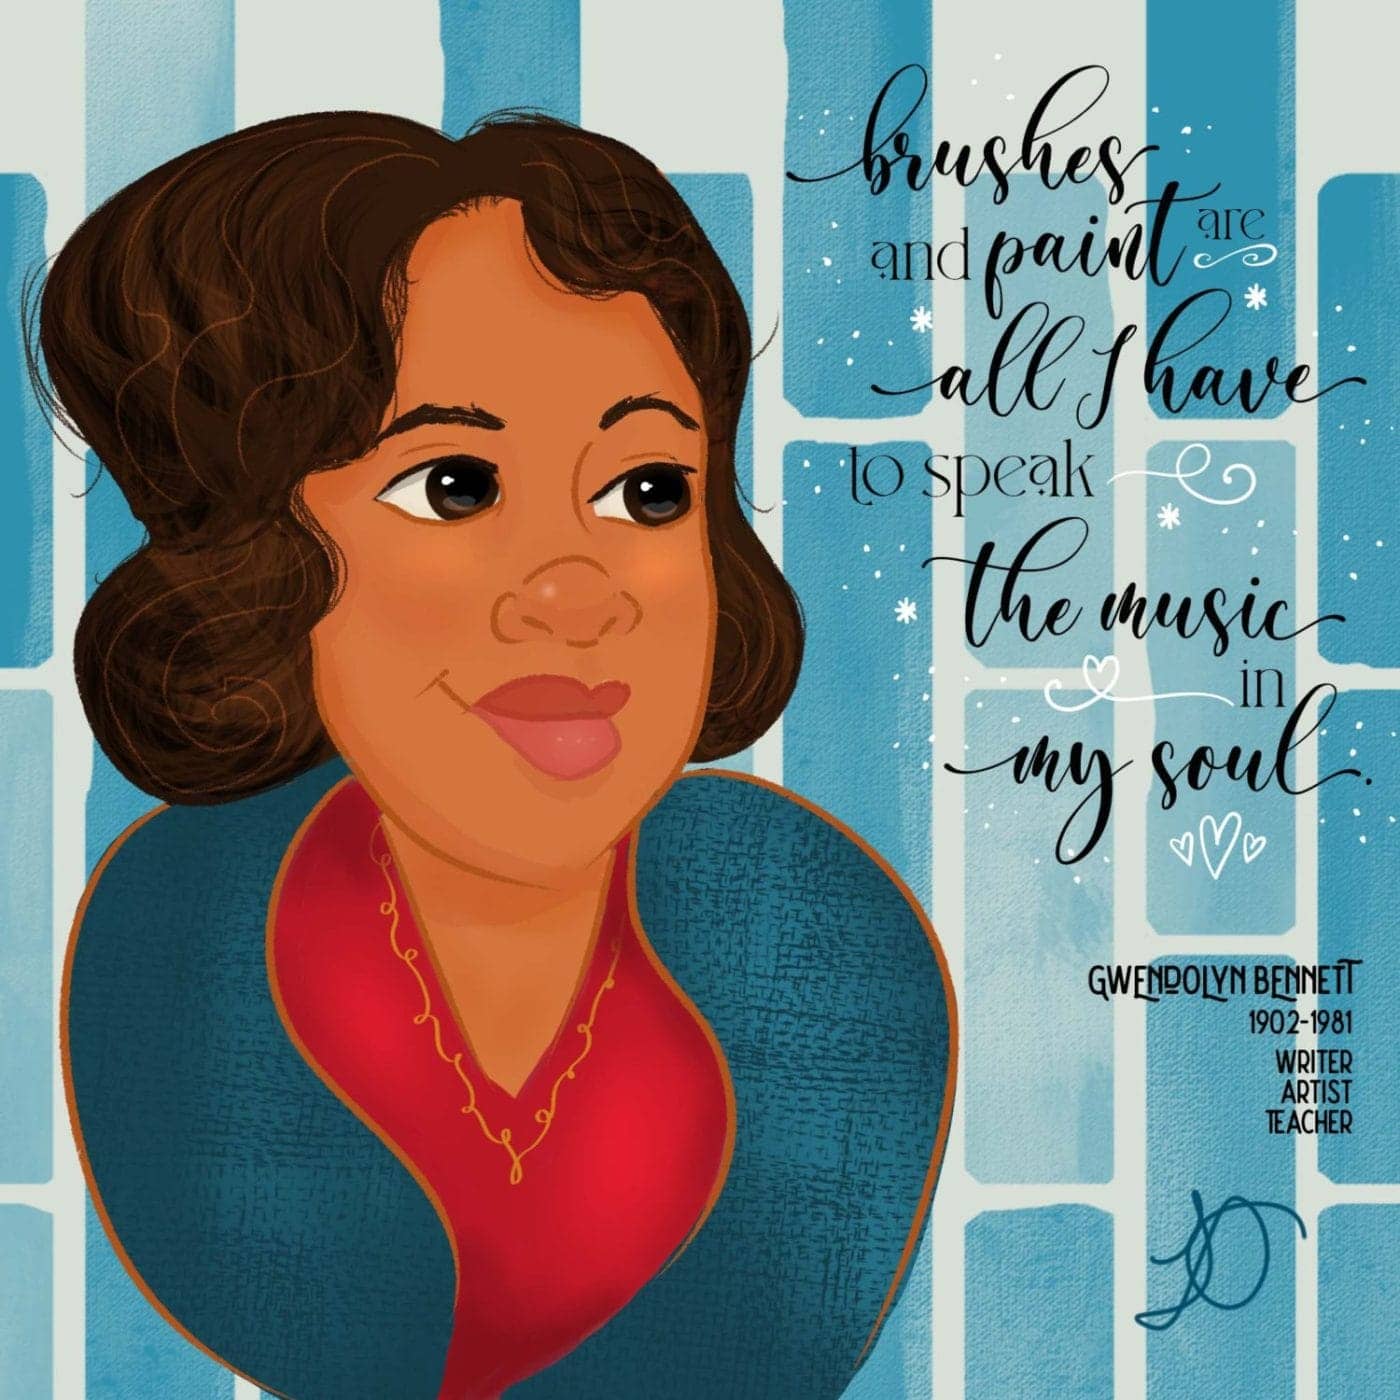 Gwendolyn-Bennett-portrait-by-Tiffany-Golden-in-SOL-Affirmations-1400x1400, Children’s book author Tiffany Golden used the pandemic to learn the art of illustrating￼, Culture Currents News & Views 